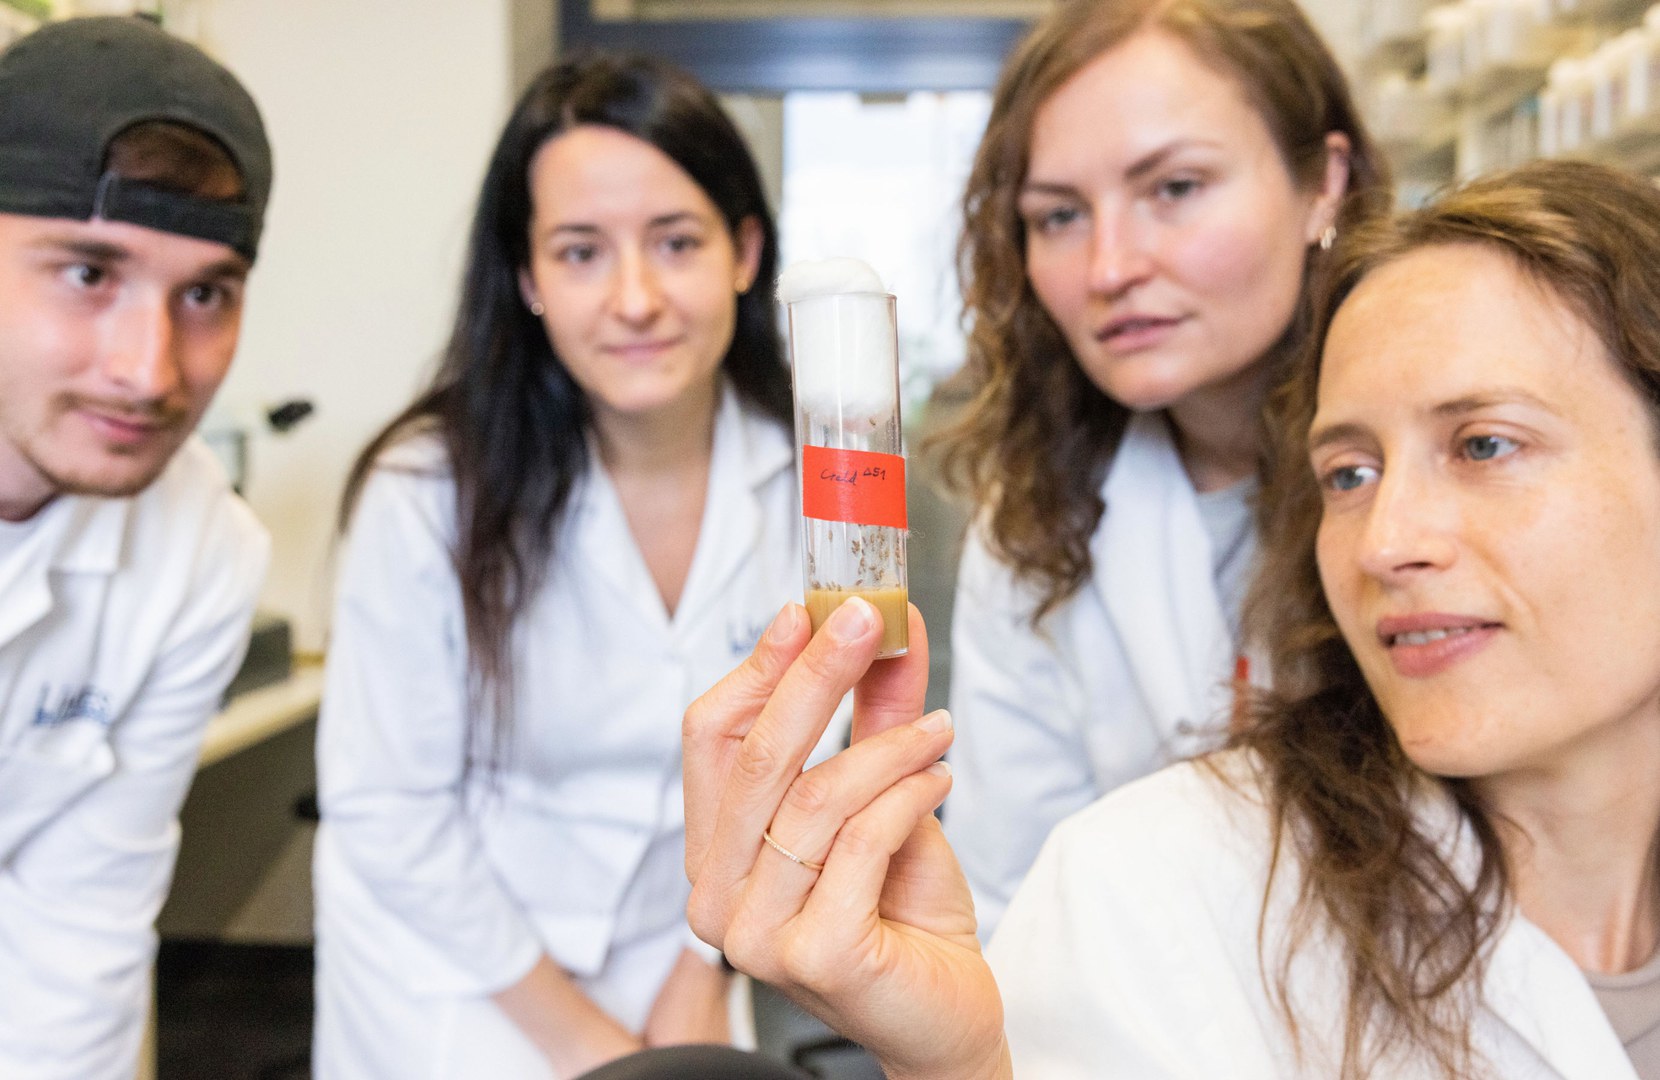 A research team from the University of Bonn has studied the function of a protein in flies. From left to right: Santiago Maya, Dr. Gabriela Edwards Faret, Nicole Kucharowski and study leader Dr. Margret Helene Bülow.